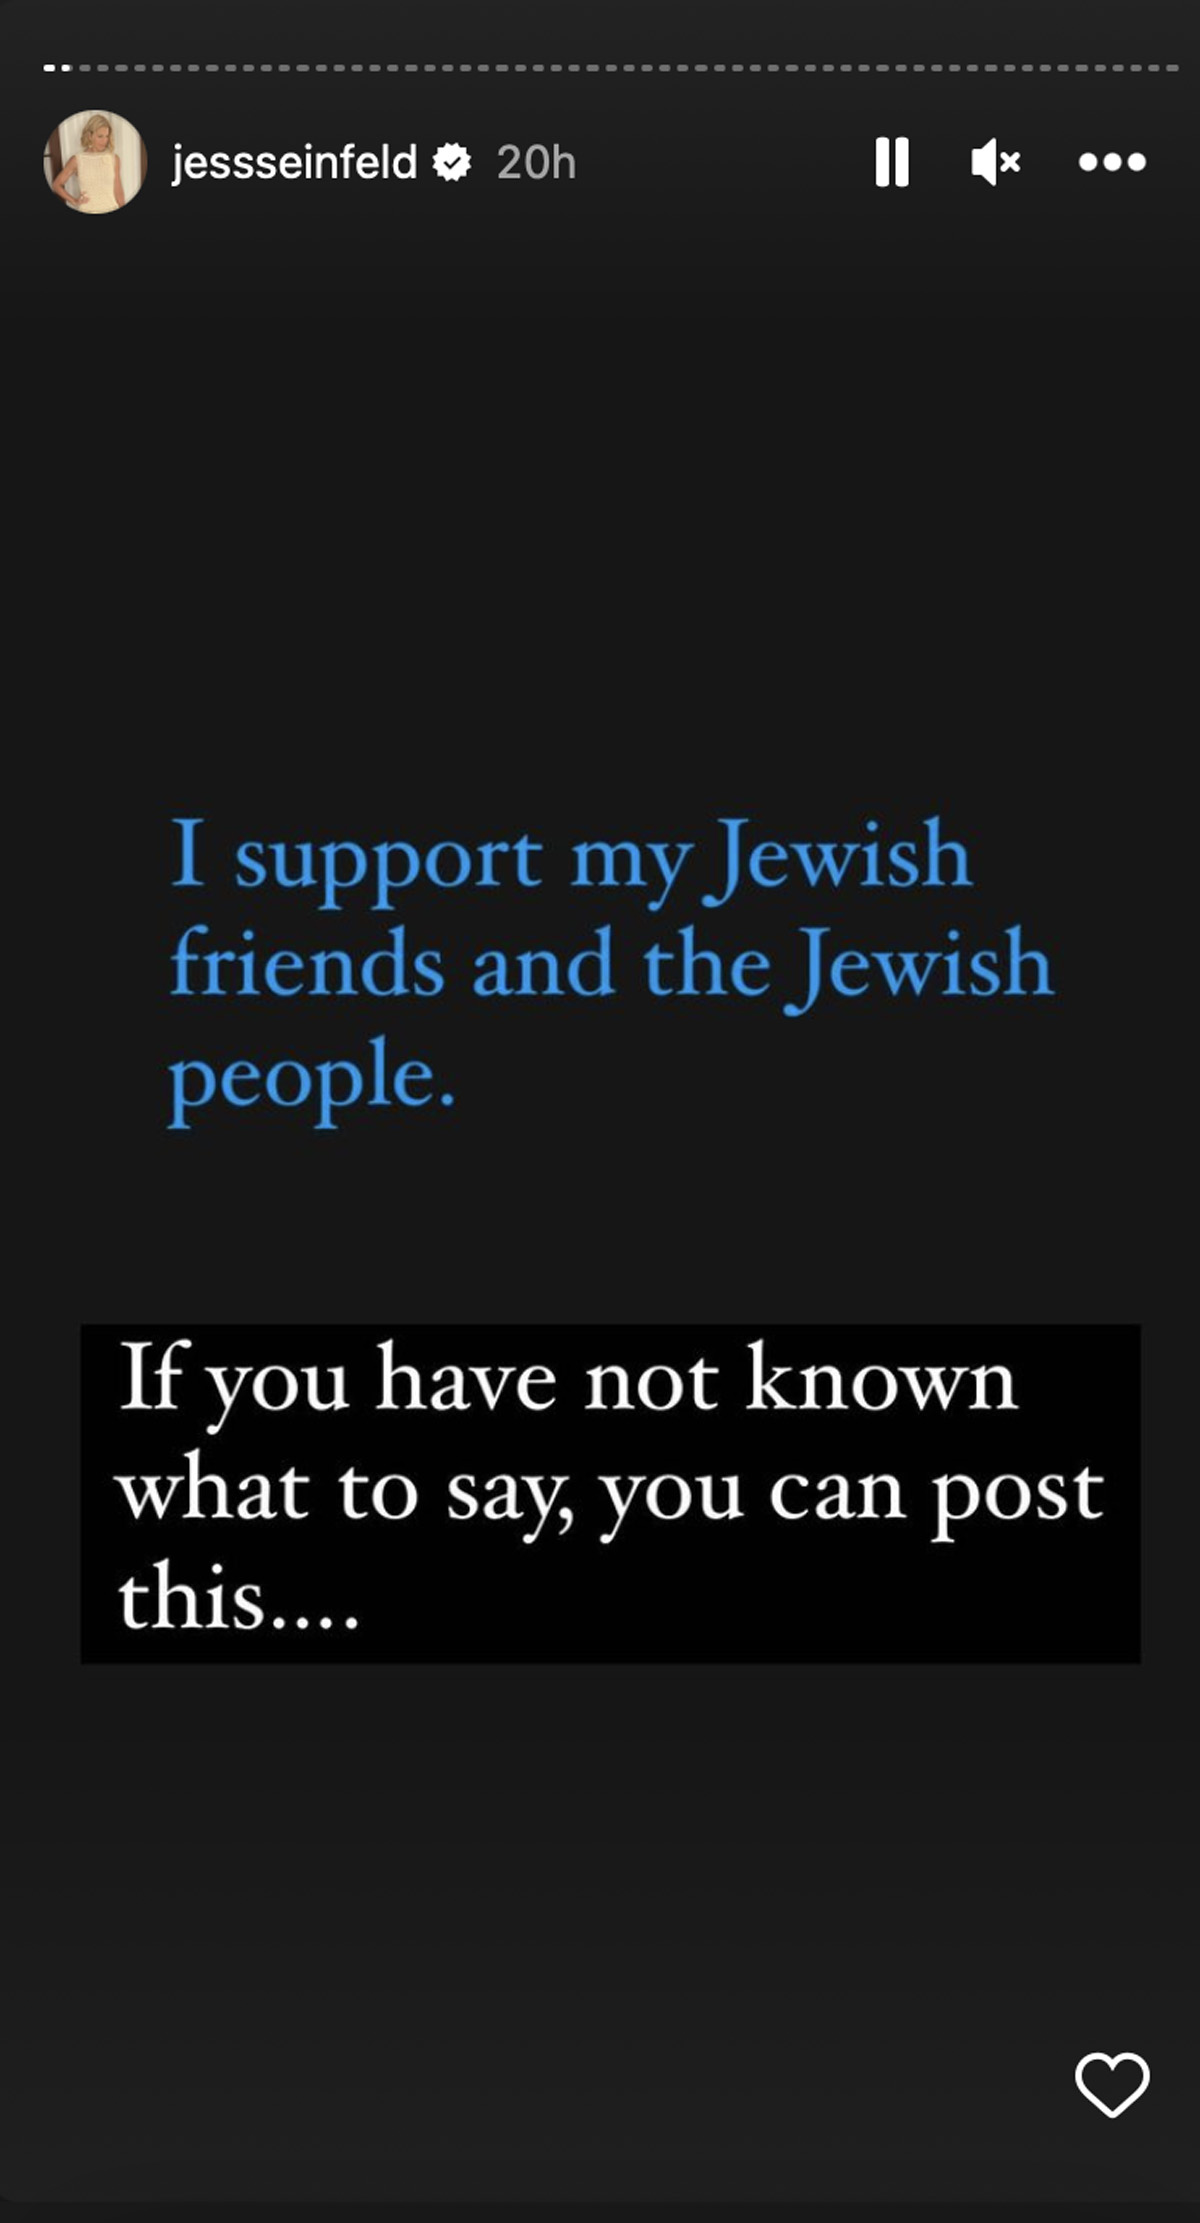 Khloé Kardashian & Other Celebs Show Support For Jewish People Amid Kanye's Awful Comments